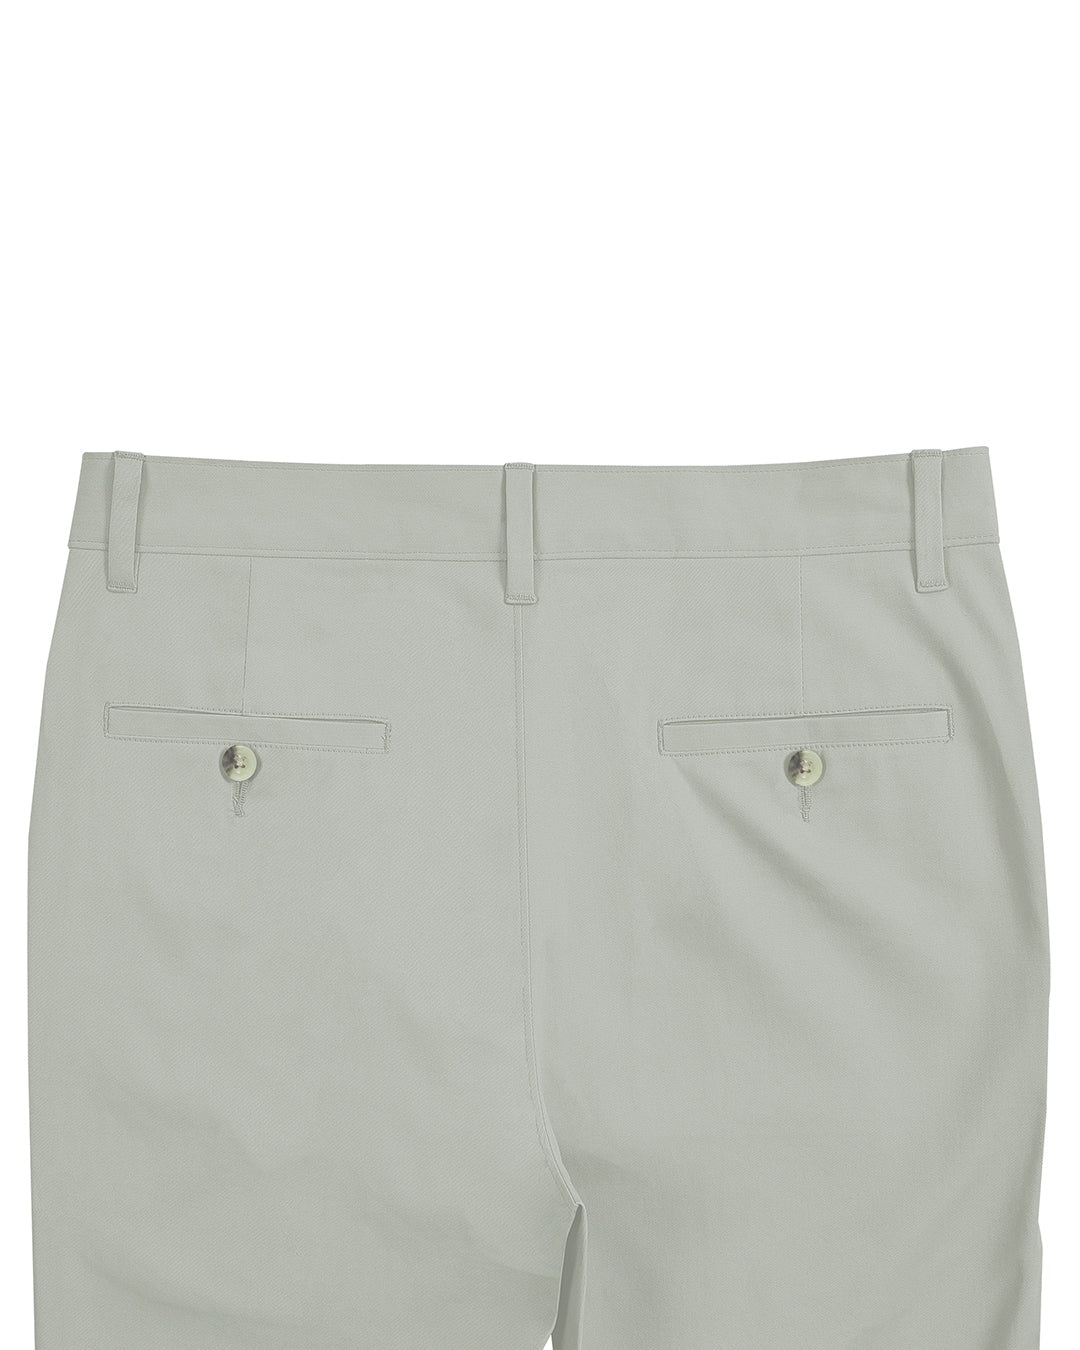 Back view of custom Genoa Chino pants for men by Luxire in pale green